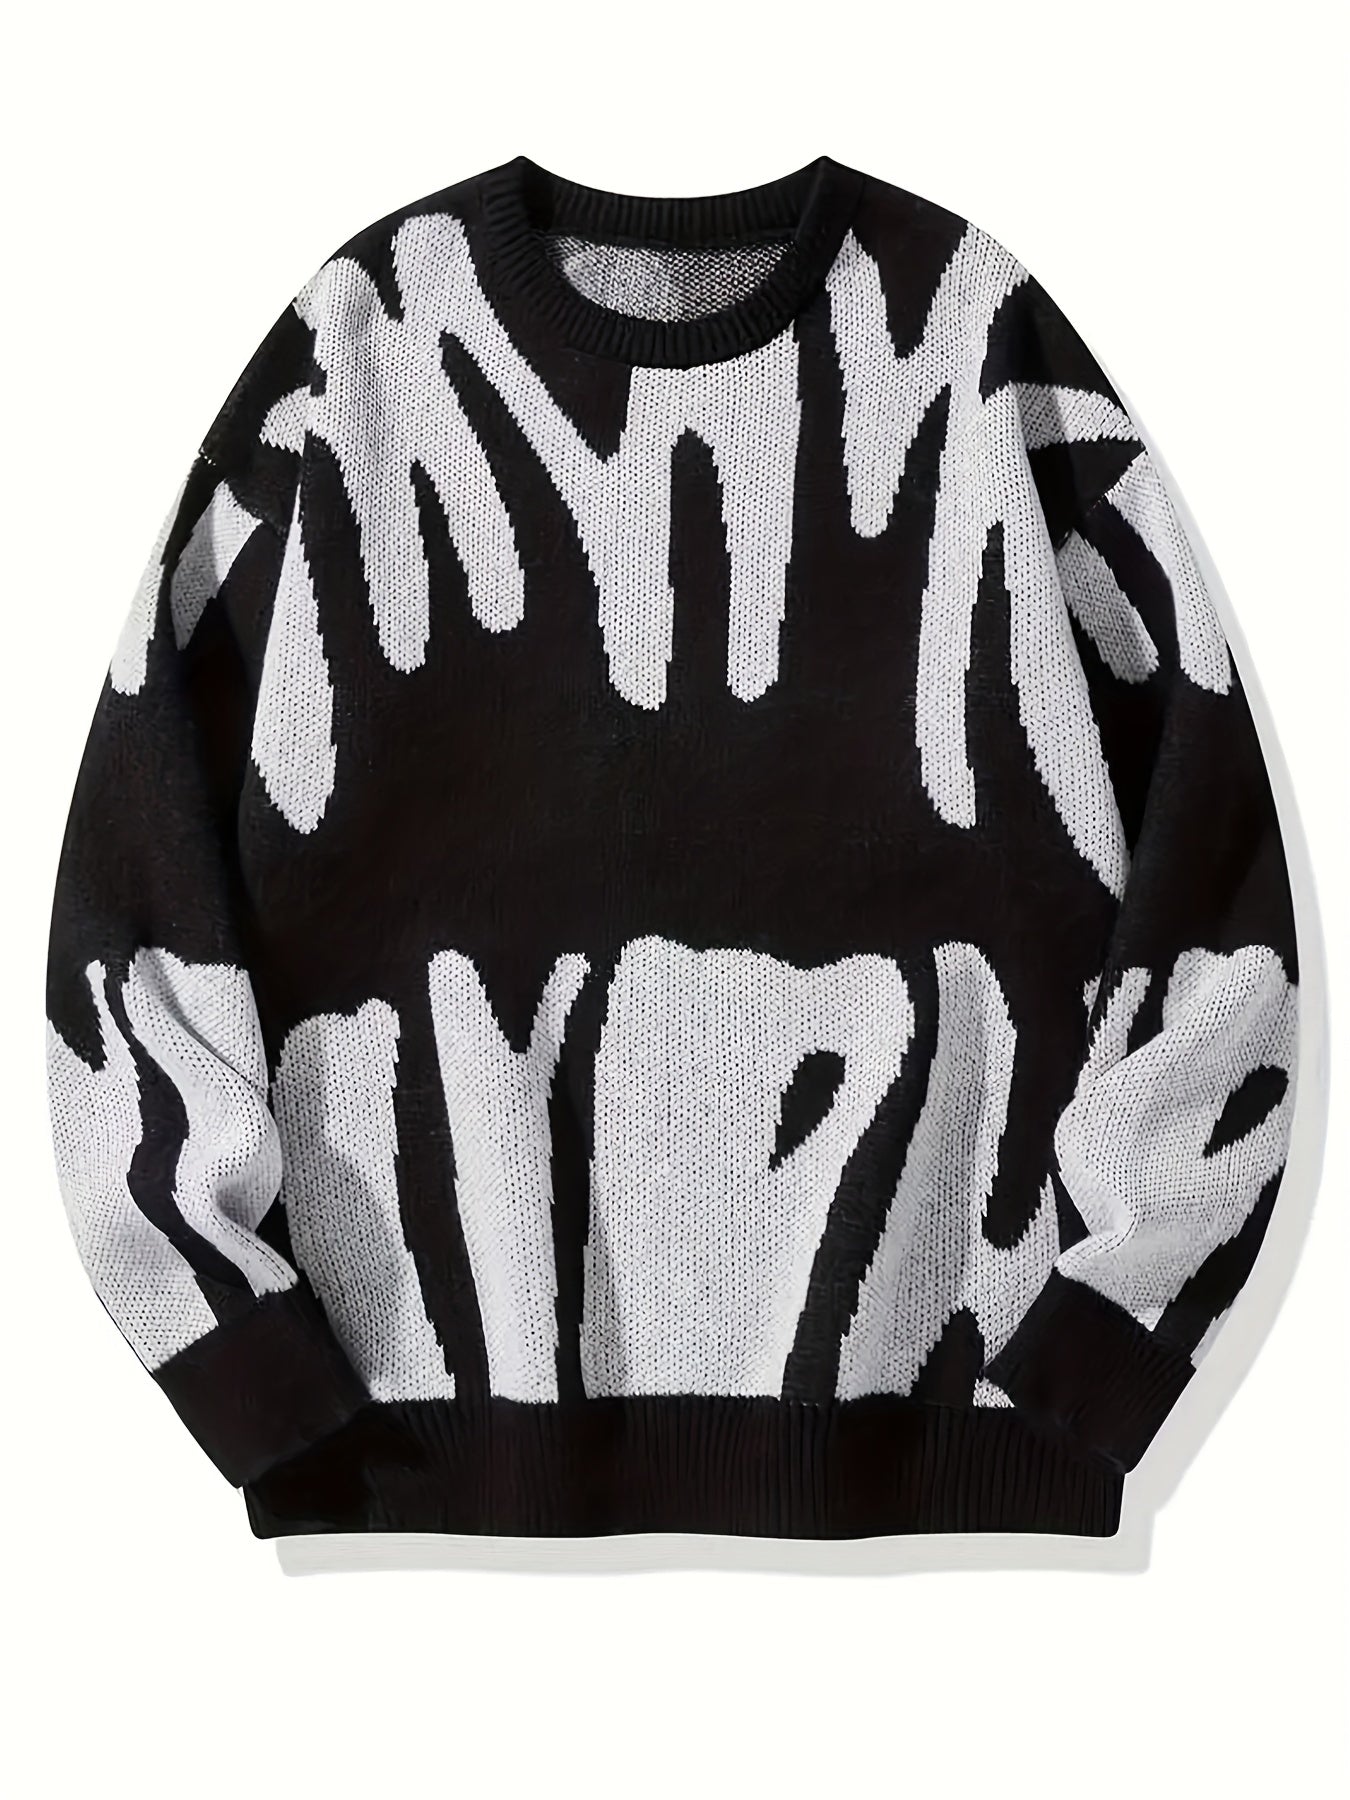 Vzyzv Y2K Graphic Pattern Pullover Sweater, Crew Neck Long Sleeve Sweater, Women's Clothing